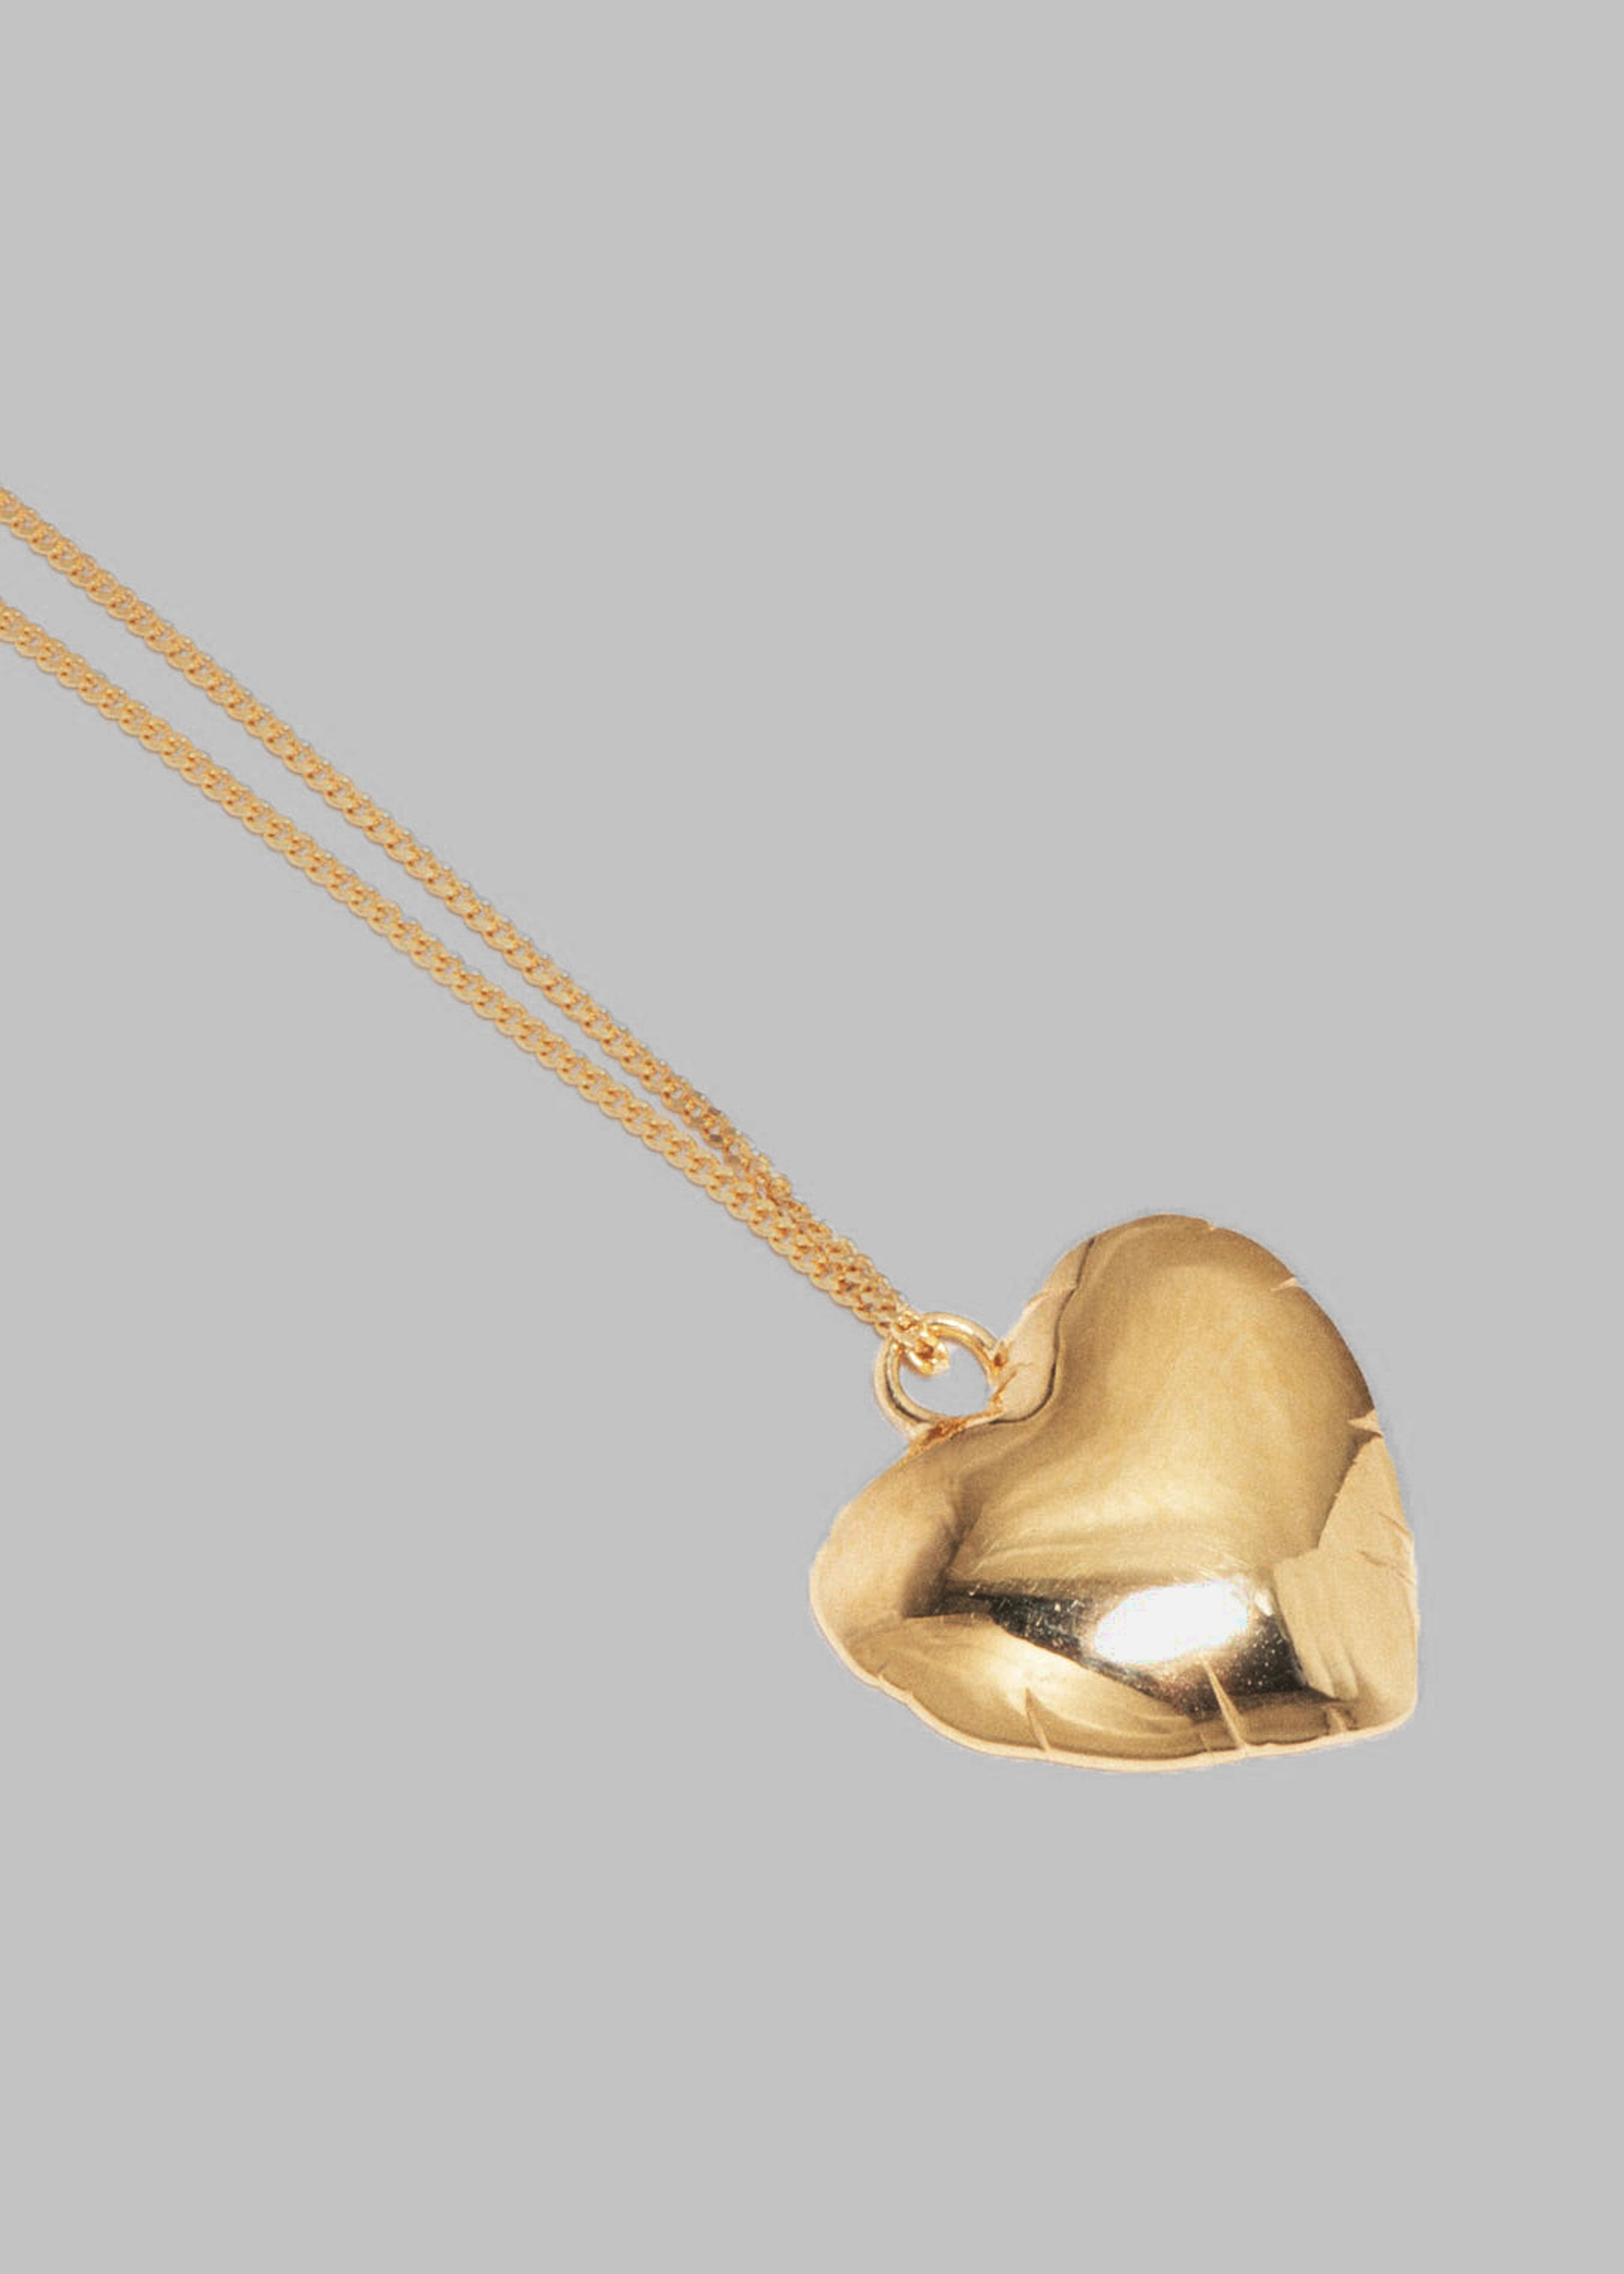 Completedworks Classicworks Heart Necklace - Gold - 2